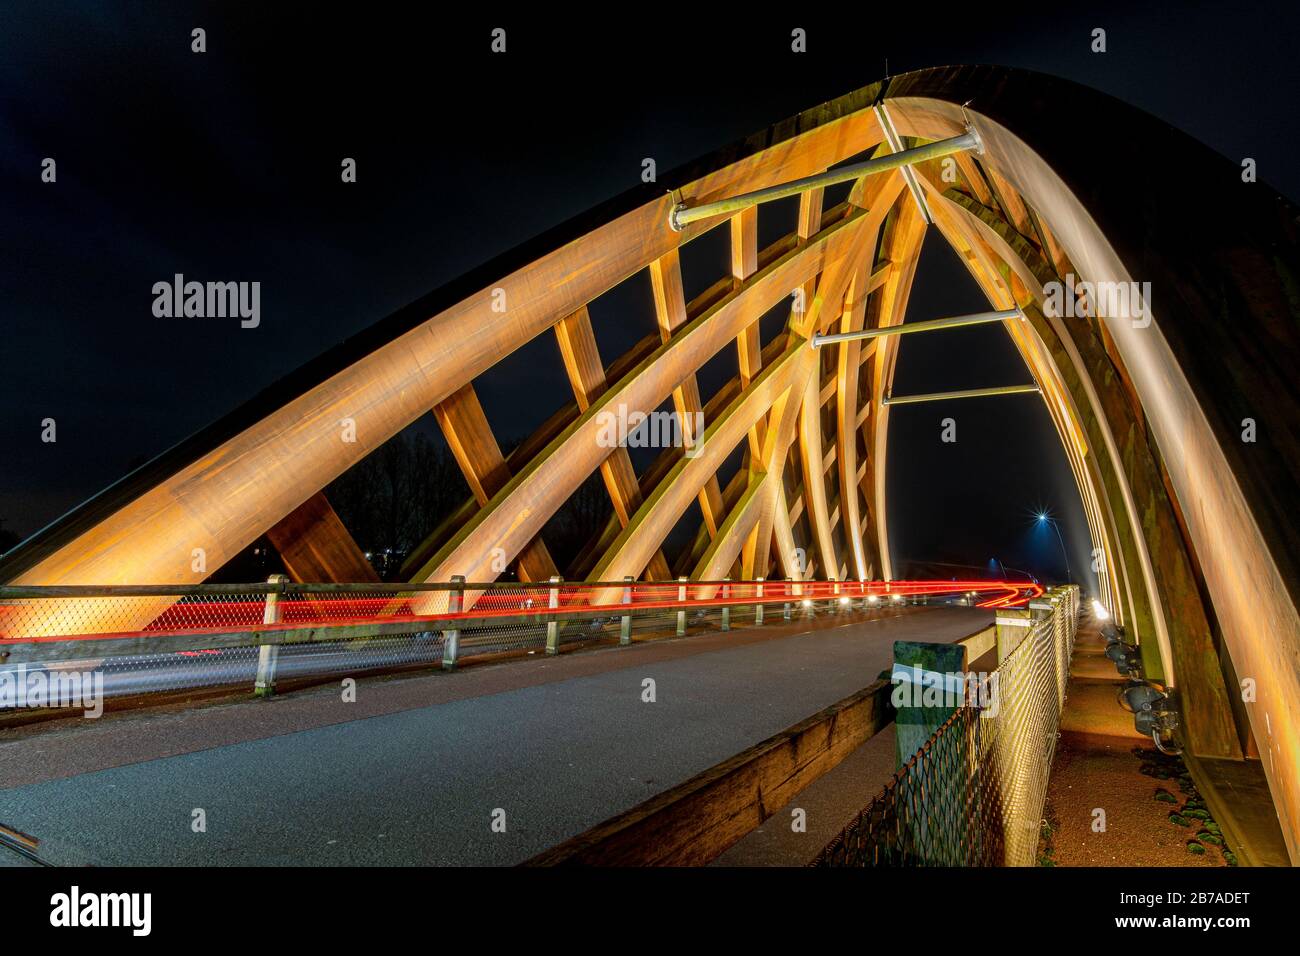 Sneek, Netherlands, September 2020. Perpendicular view of a bridge with a span made of curved wooden beams, without traffic Stock Photo